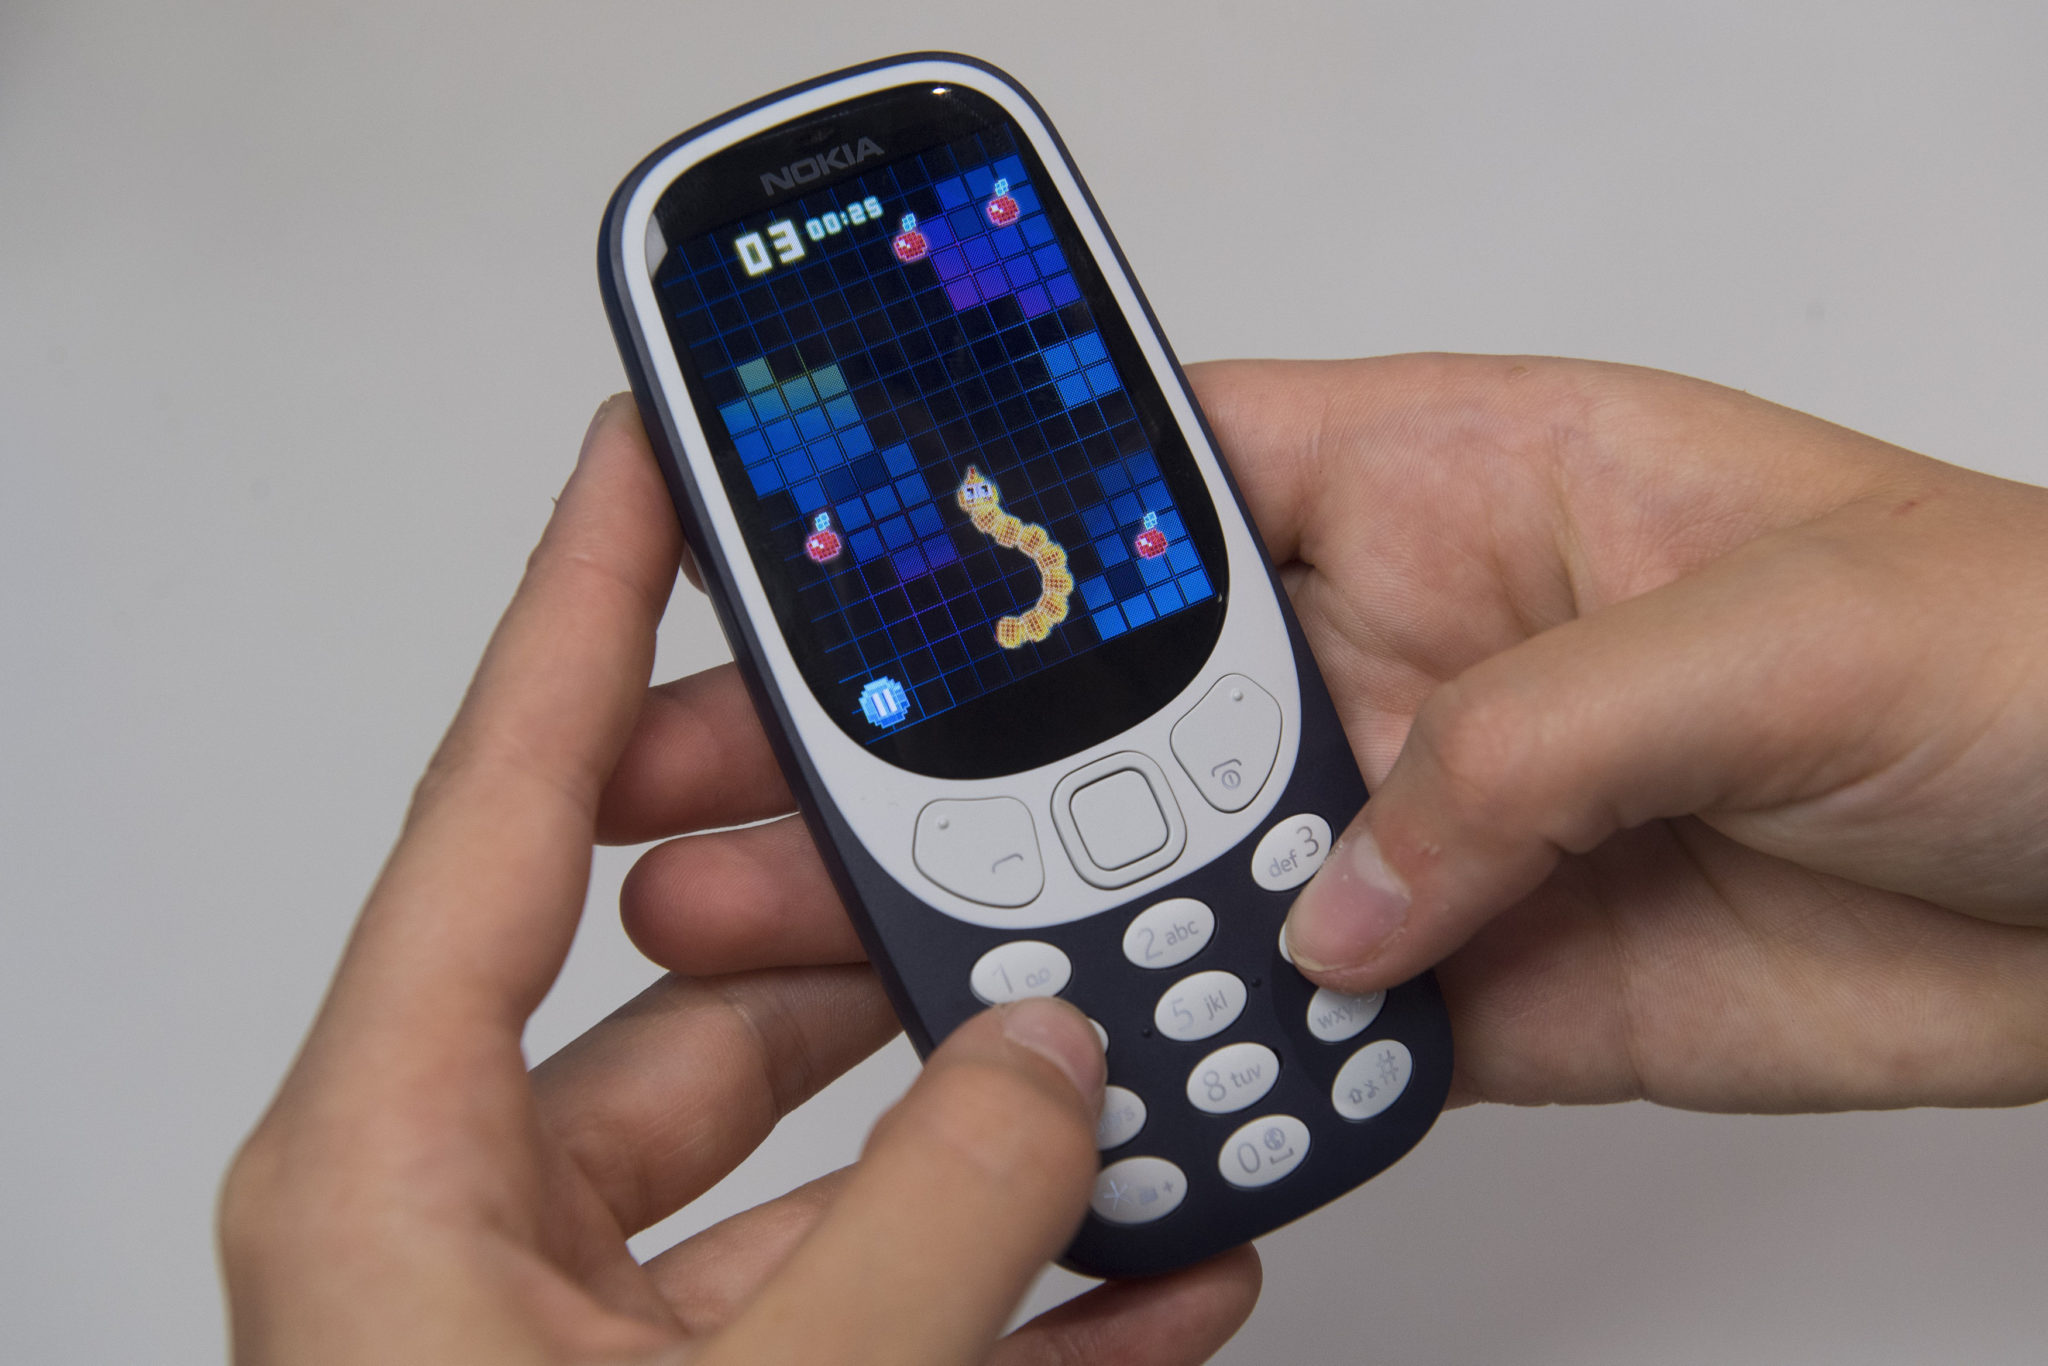 Someone playing mobile game snake on a Nokia phone